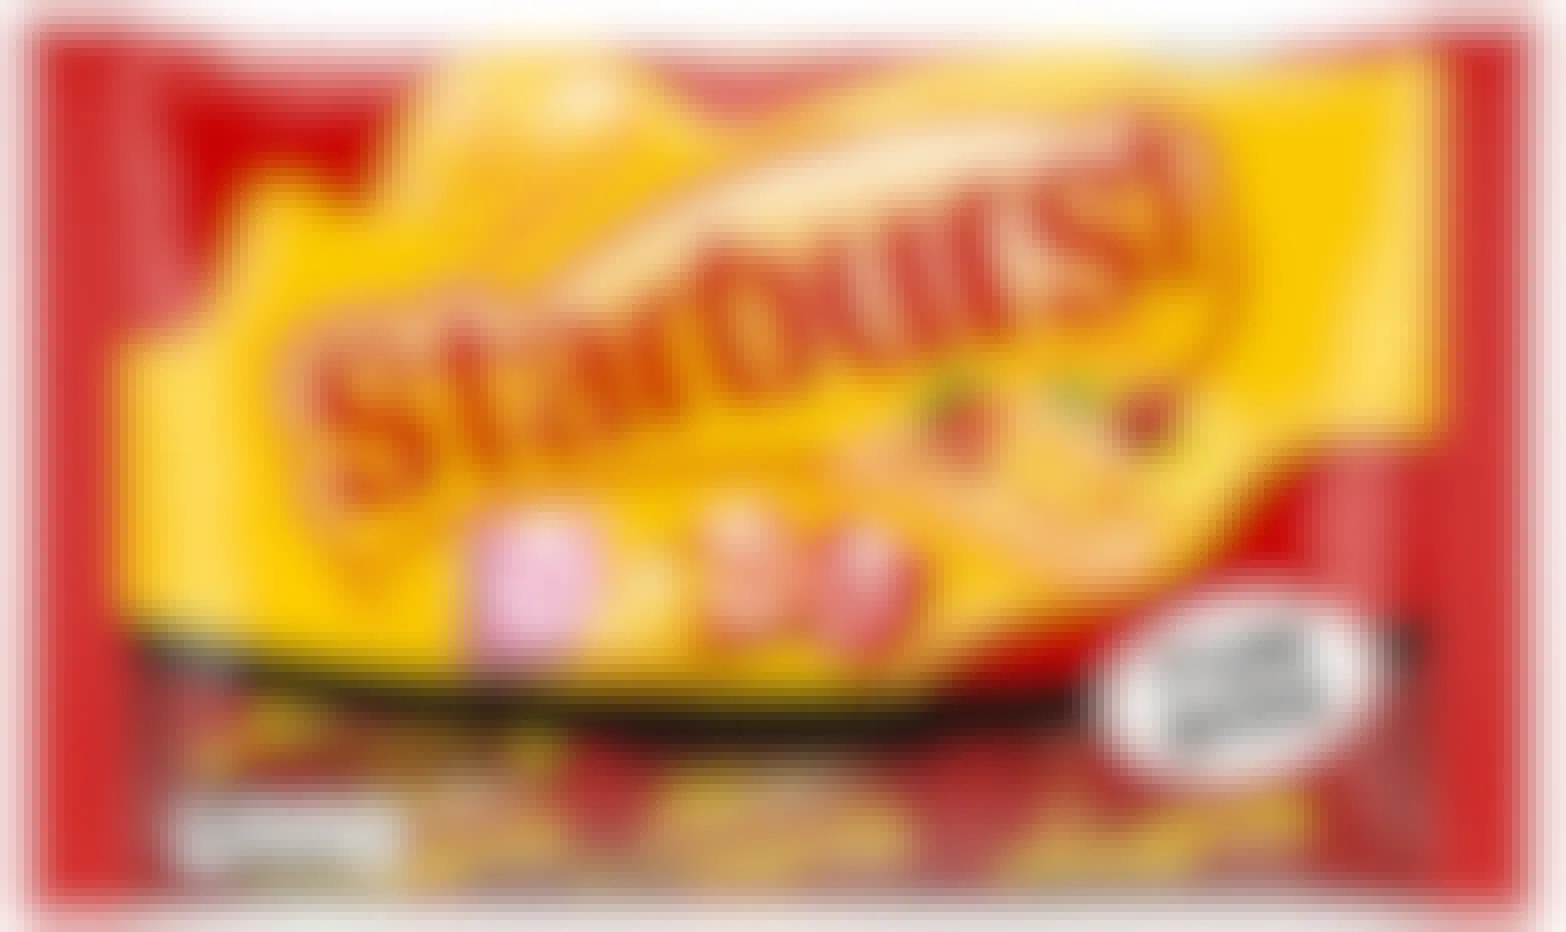 Starburst fun size candy package.